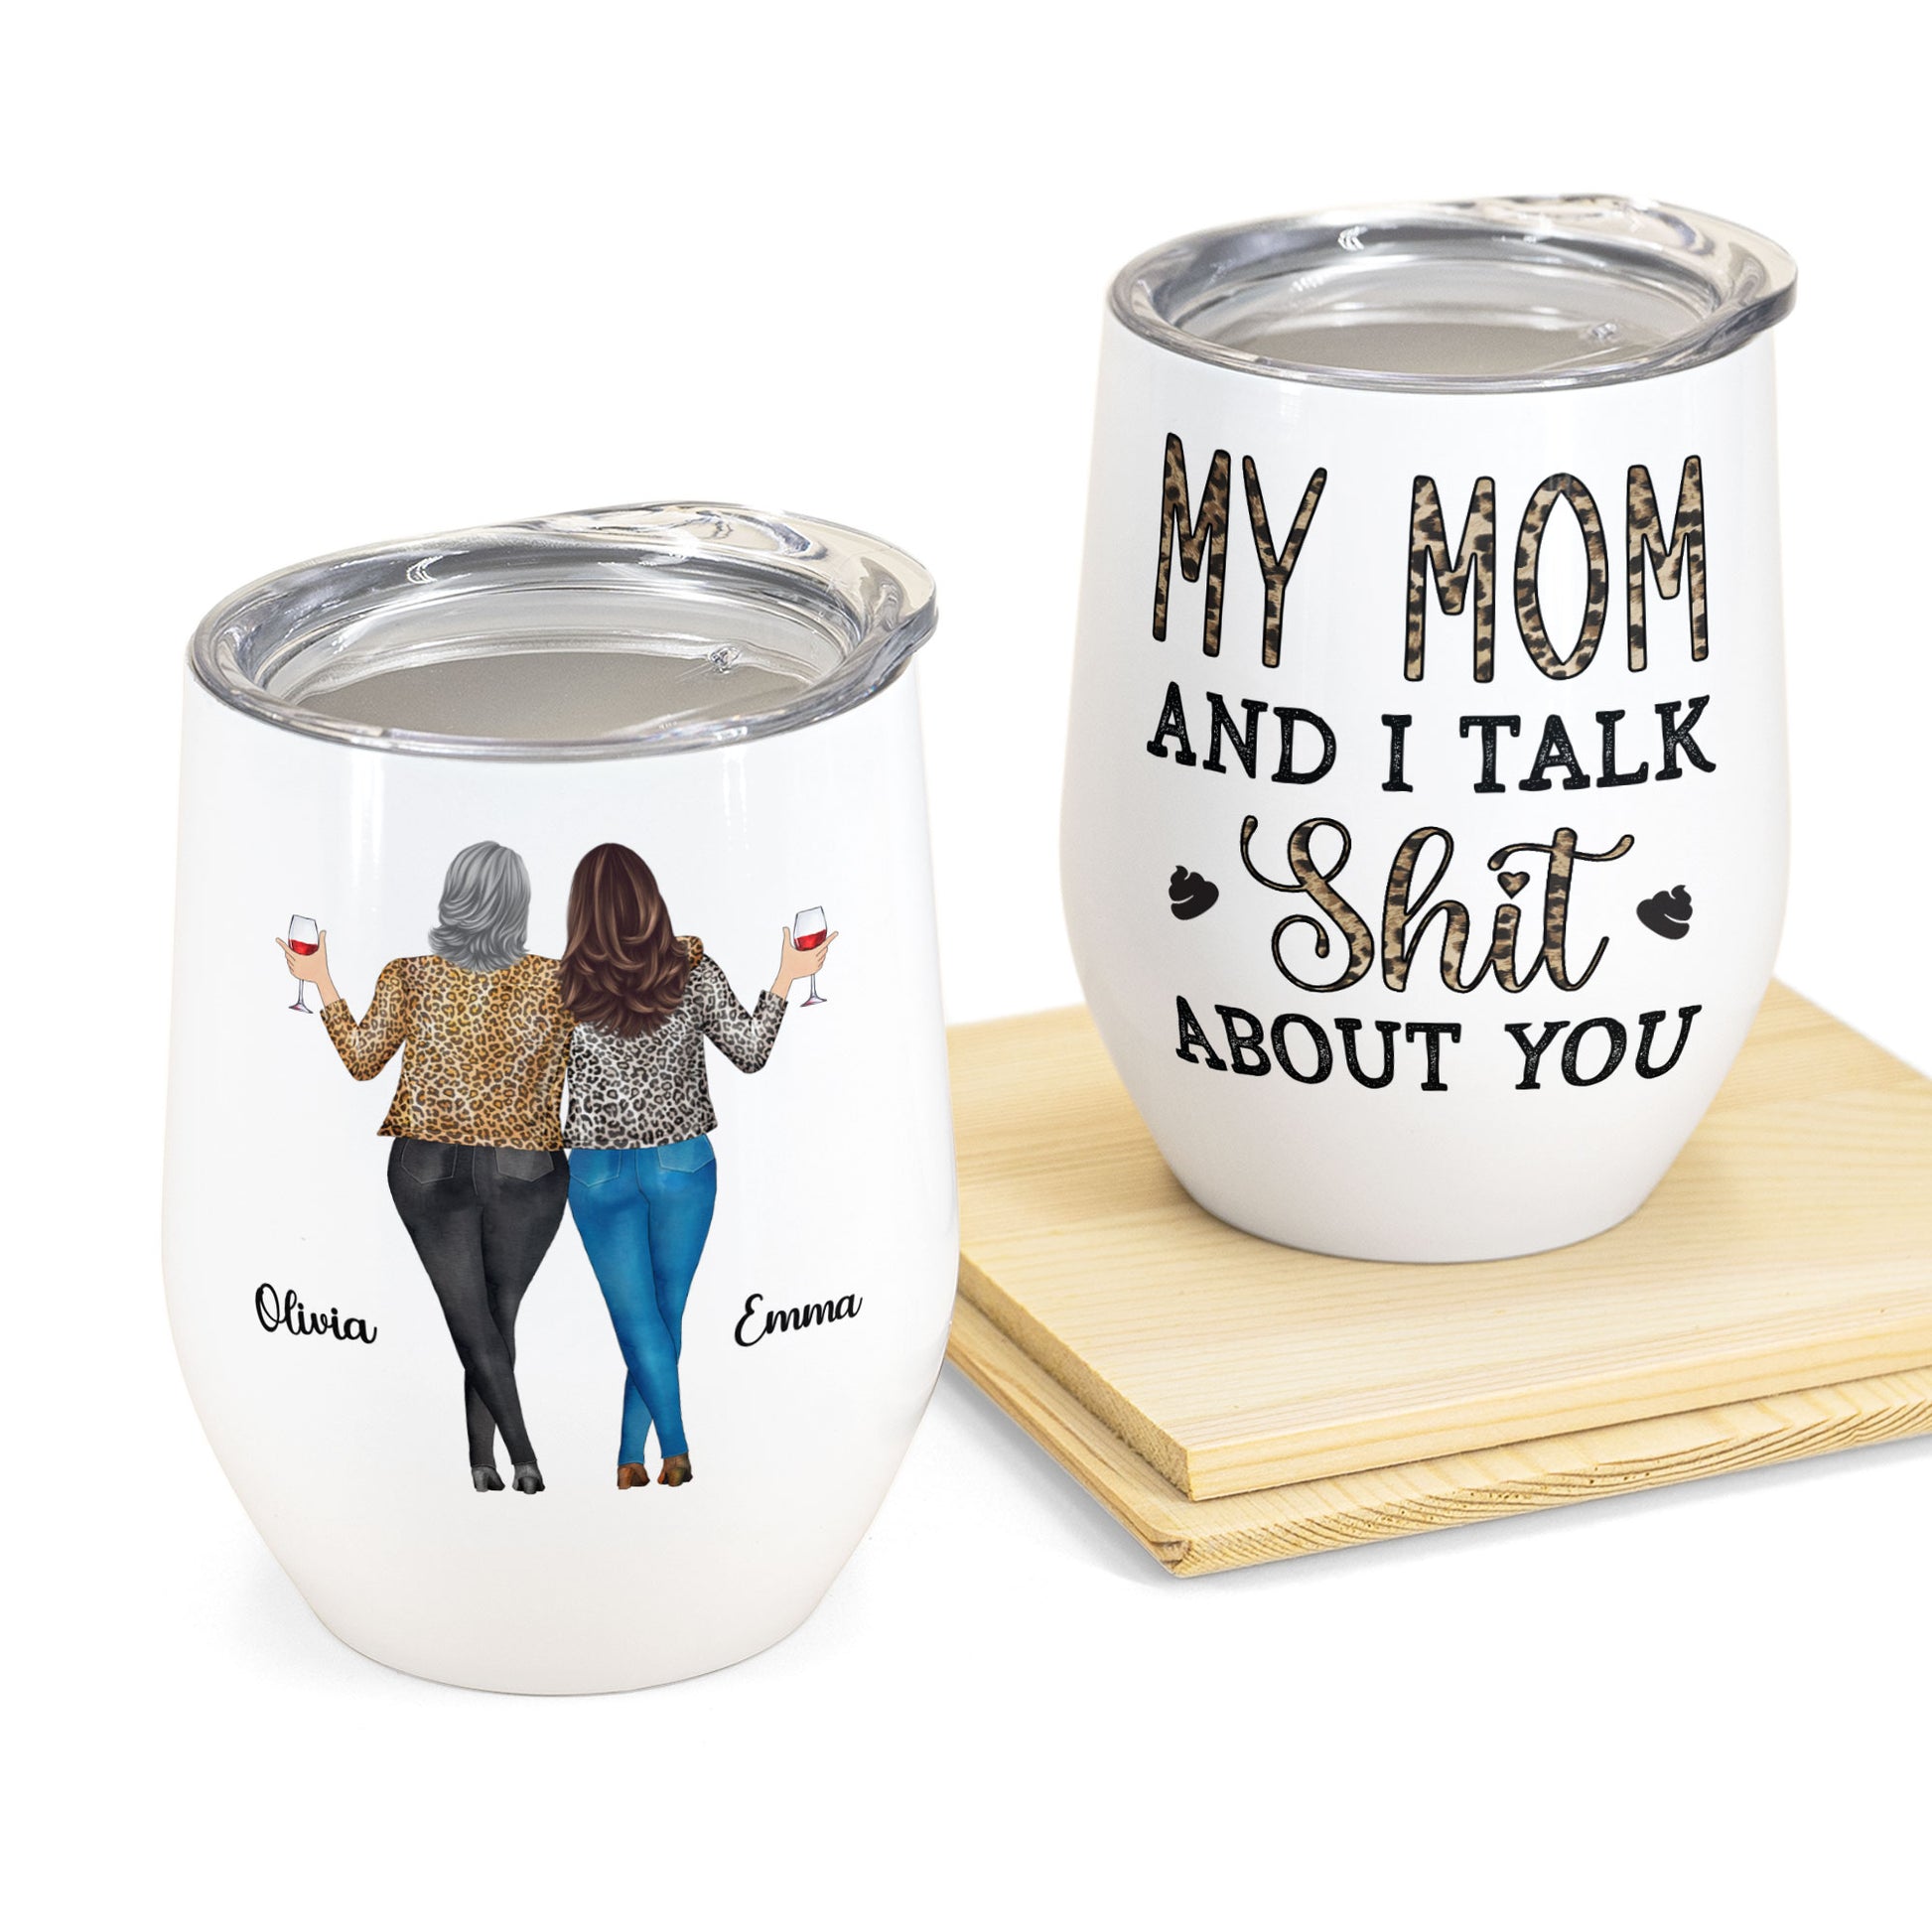 My Daughter & I Talk About You - Personalized Wine Tumbler - Gift For Mother, Daughter